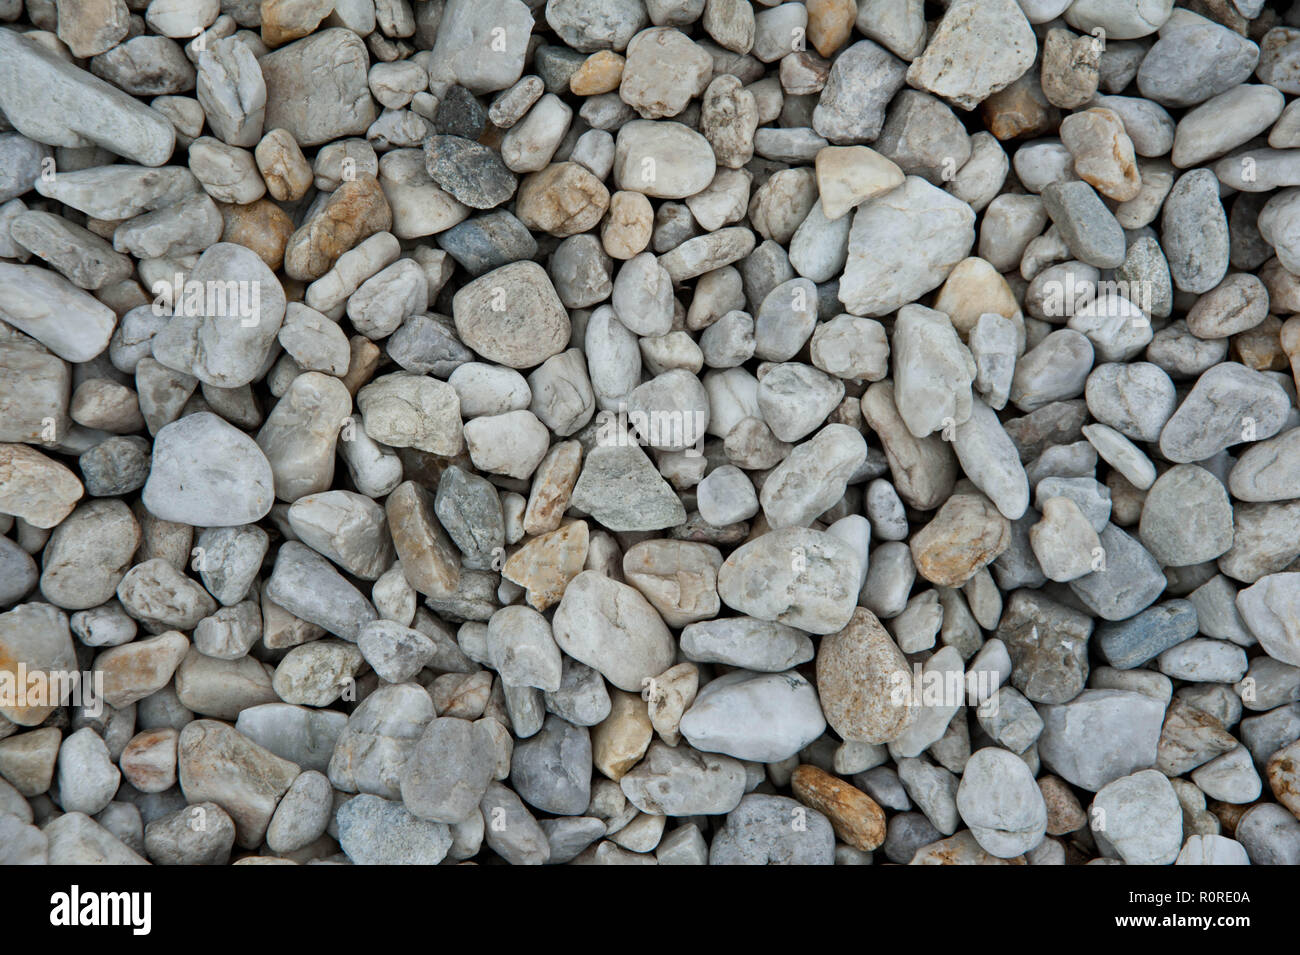 Stone pebbles white and gray gravel texture background for decoration. Stock Photo